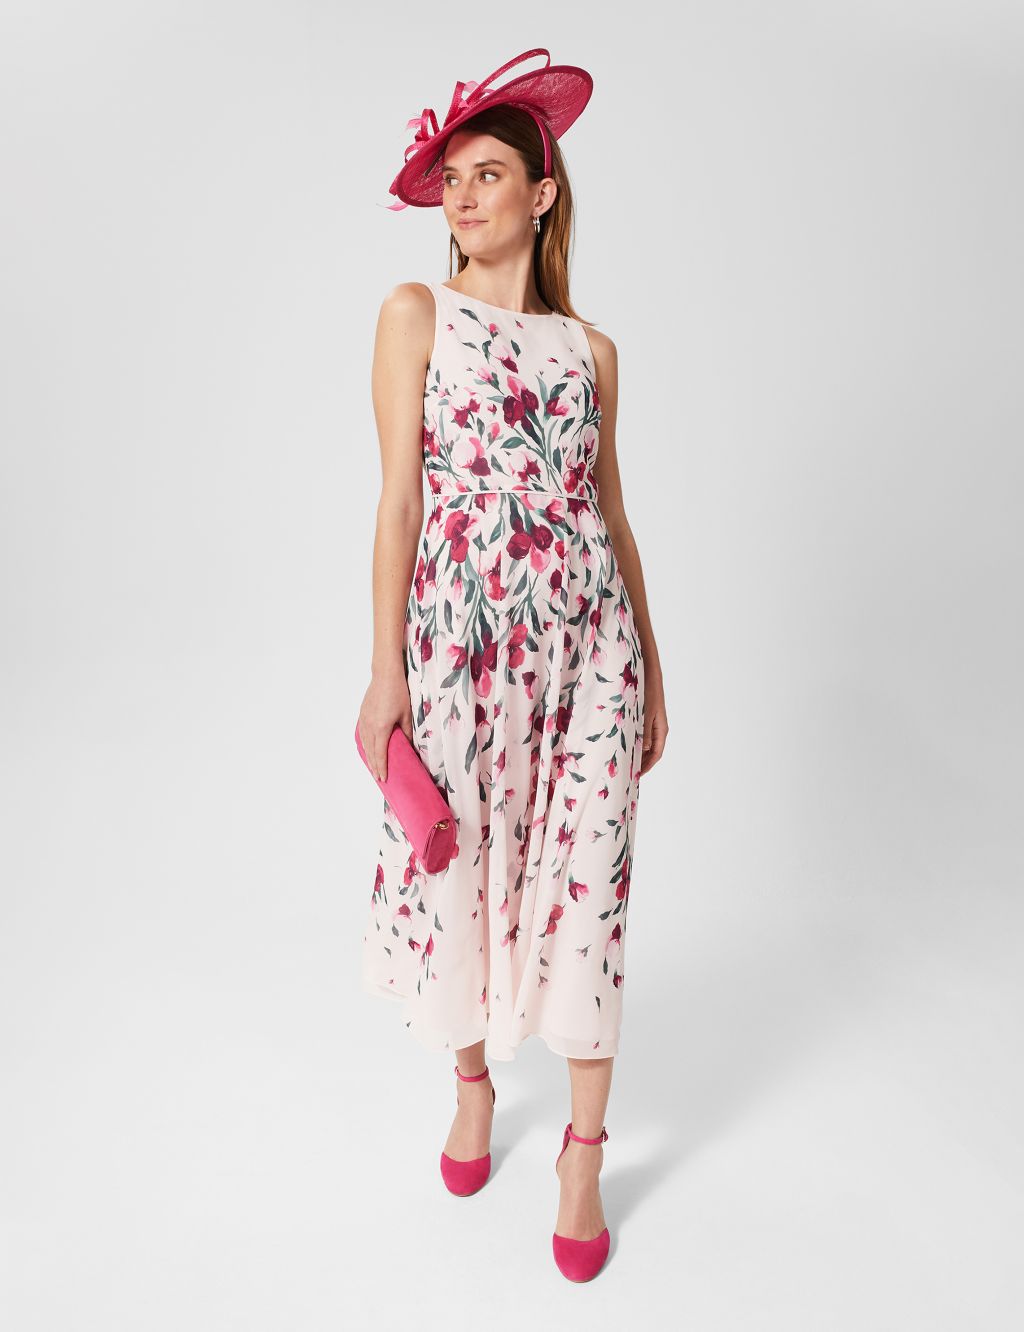 Floral Midaxi Swing Dress image 7